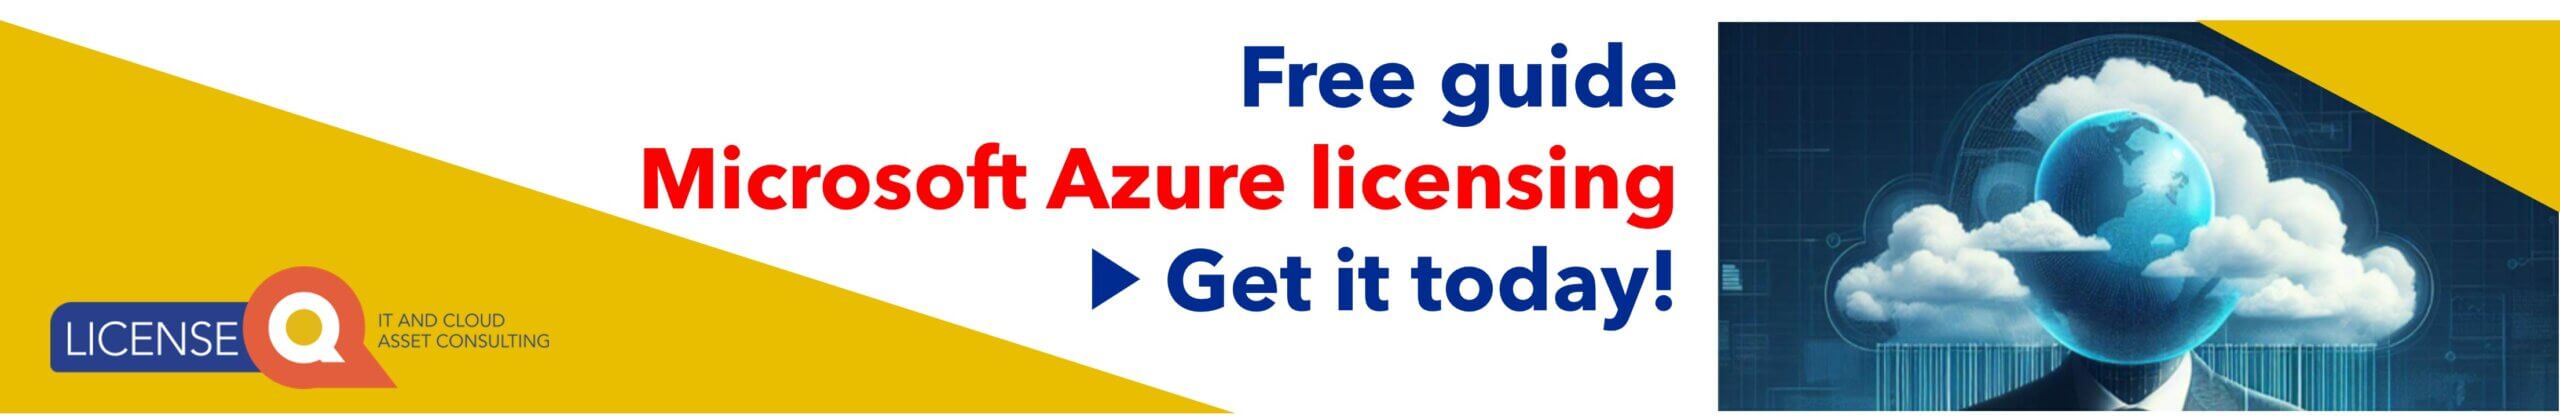 LicenseQ's free Azure guide download